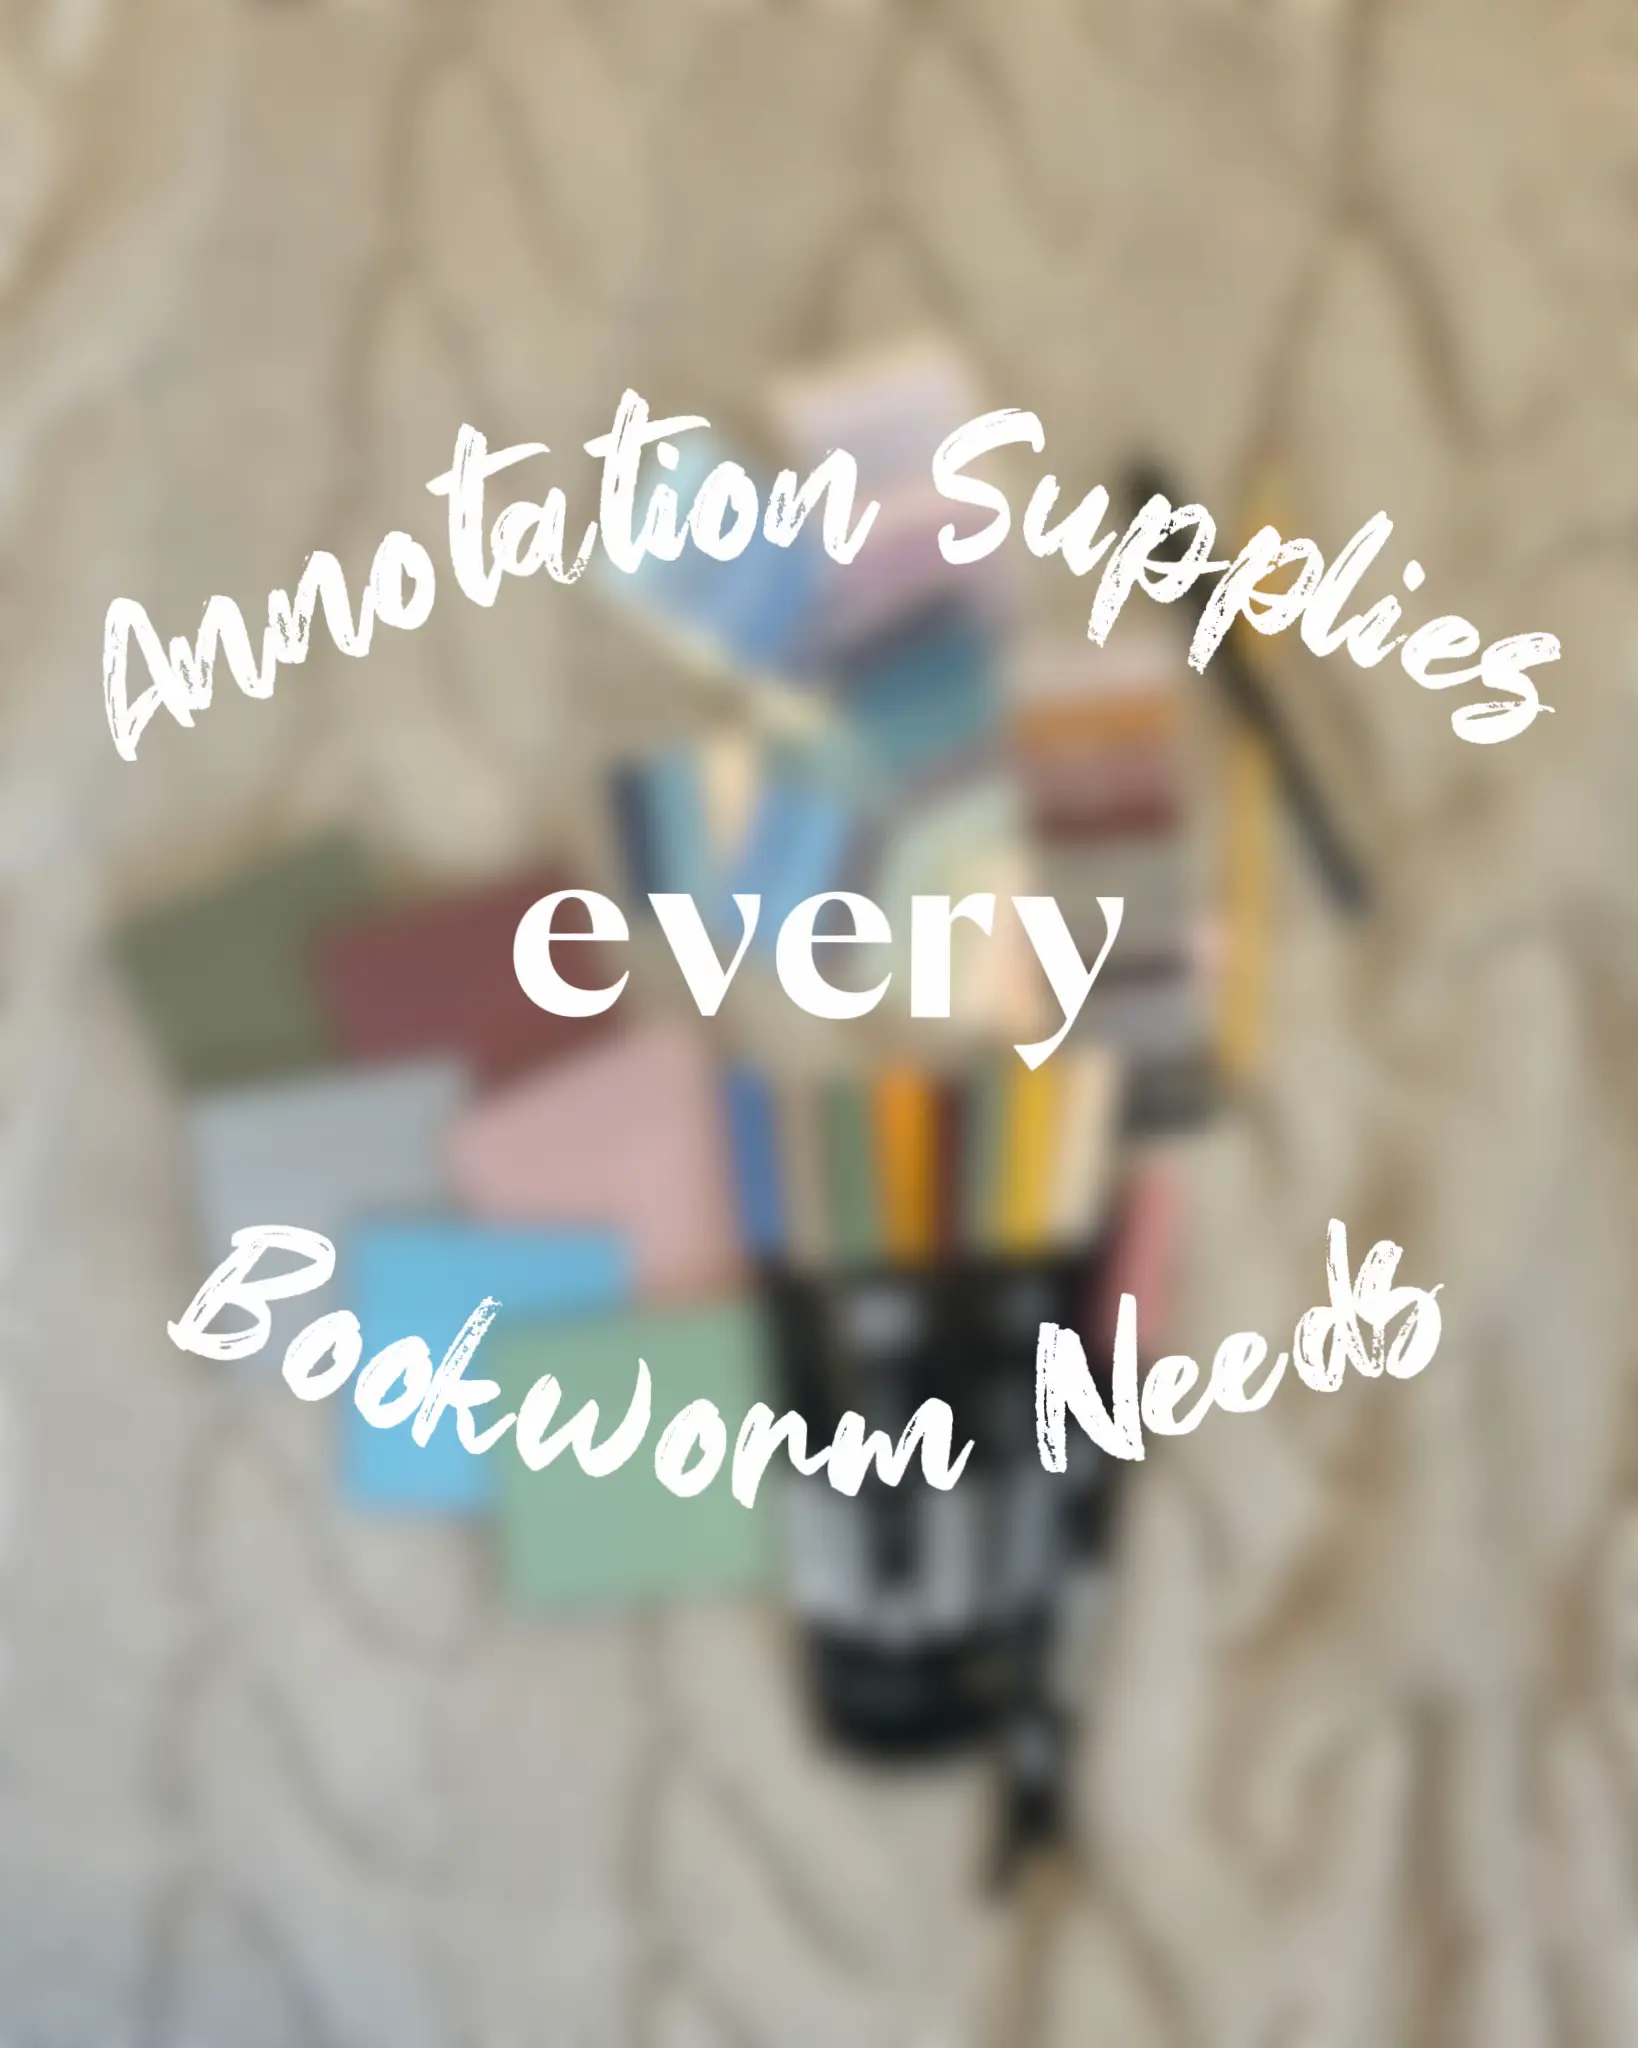 Annotation Supplies EVERY Bookworm NEEDS, Gallery posted by Loren📚